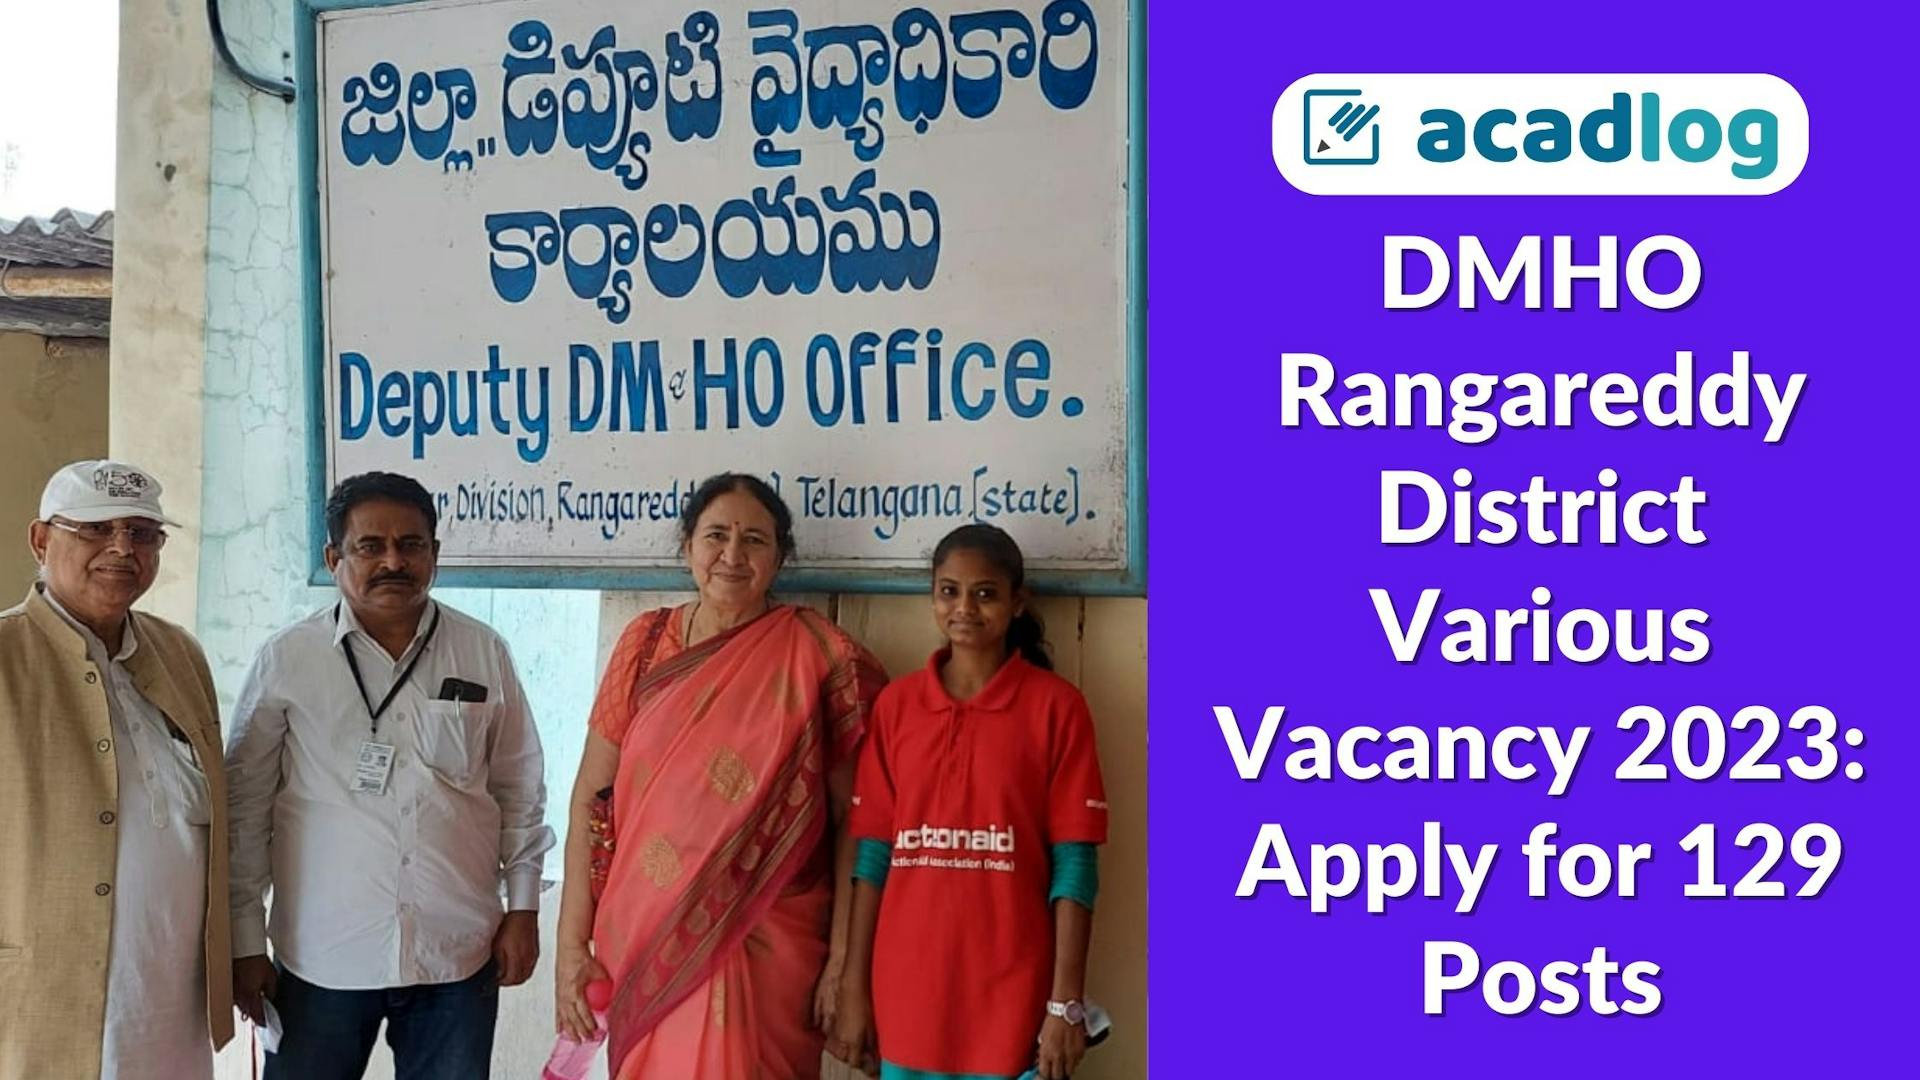 DMHO Rangareddy District Various Vacancy 2023: Apply for 129 Posts